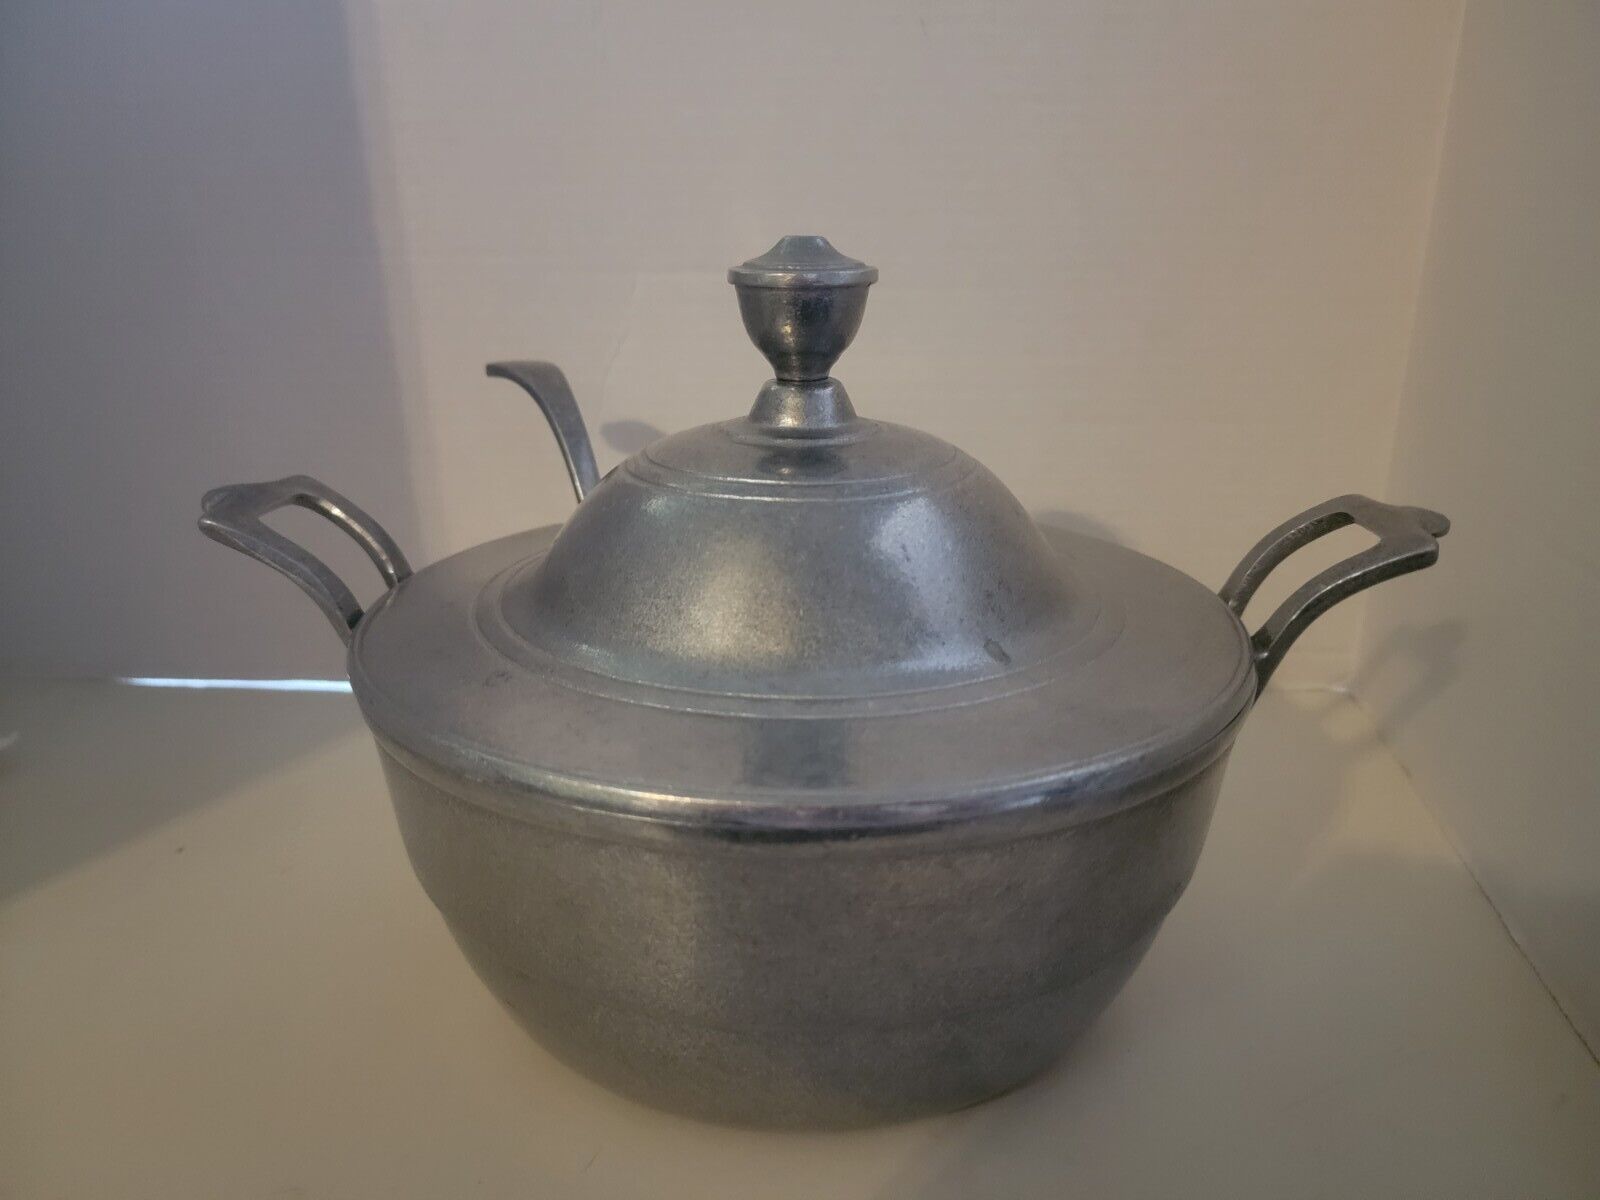 VINTAGE WILTON ARMETALE COVERED SOUP/STEW TUREEN LADLE PEWTER USA .